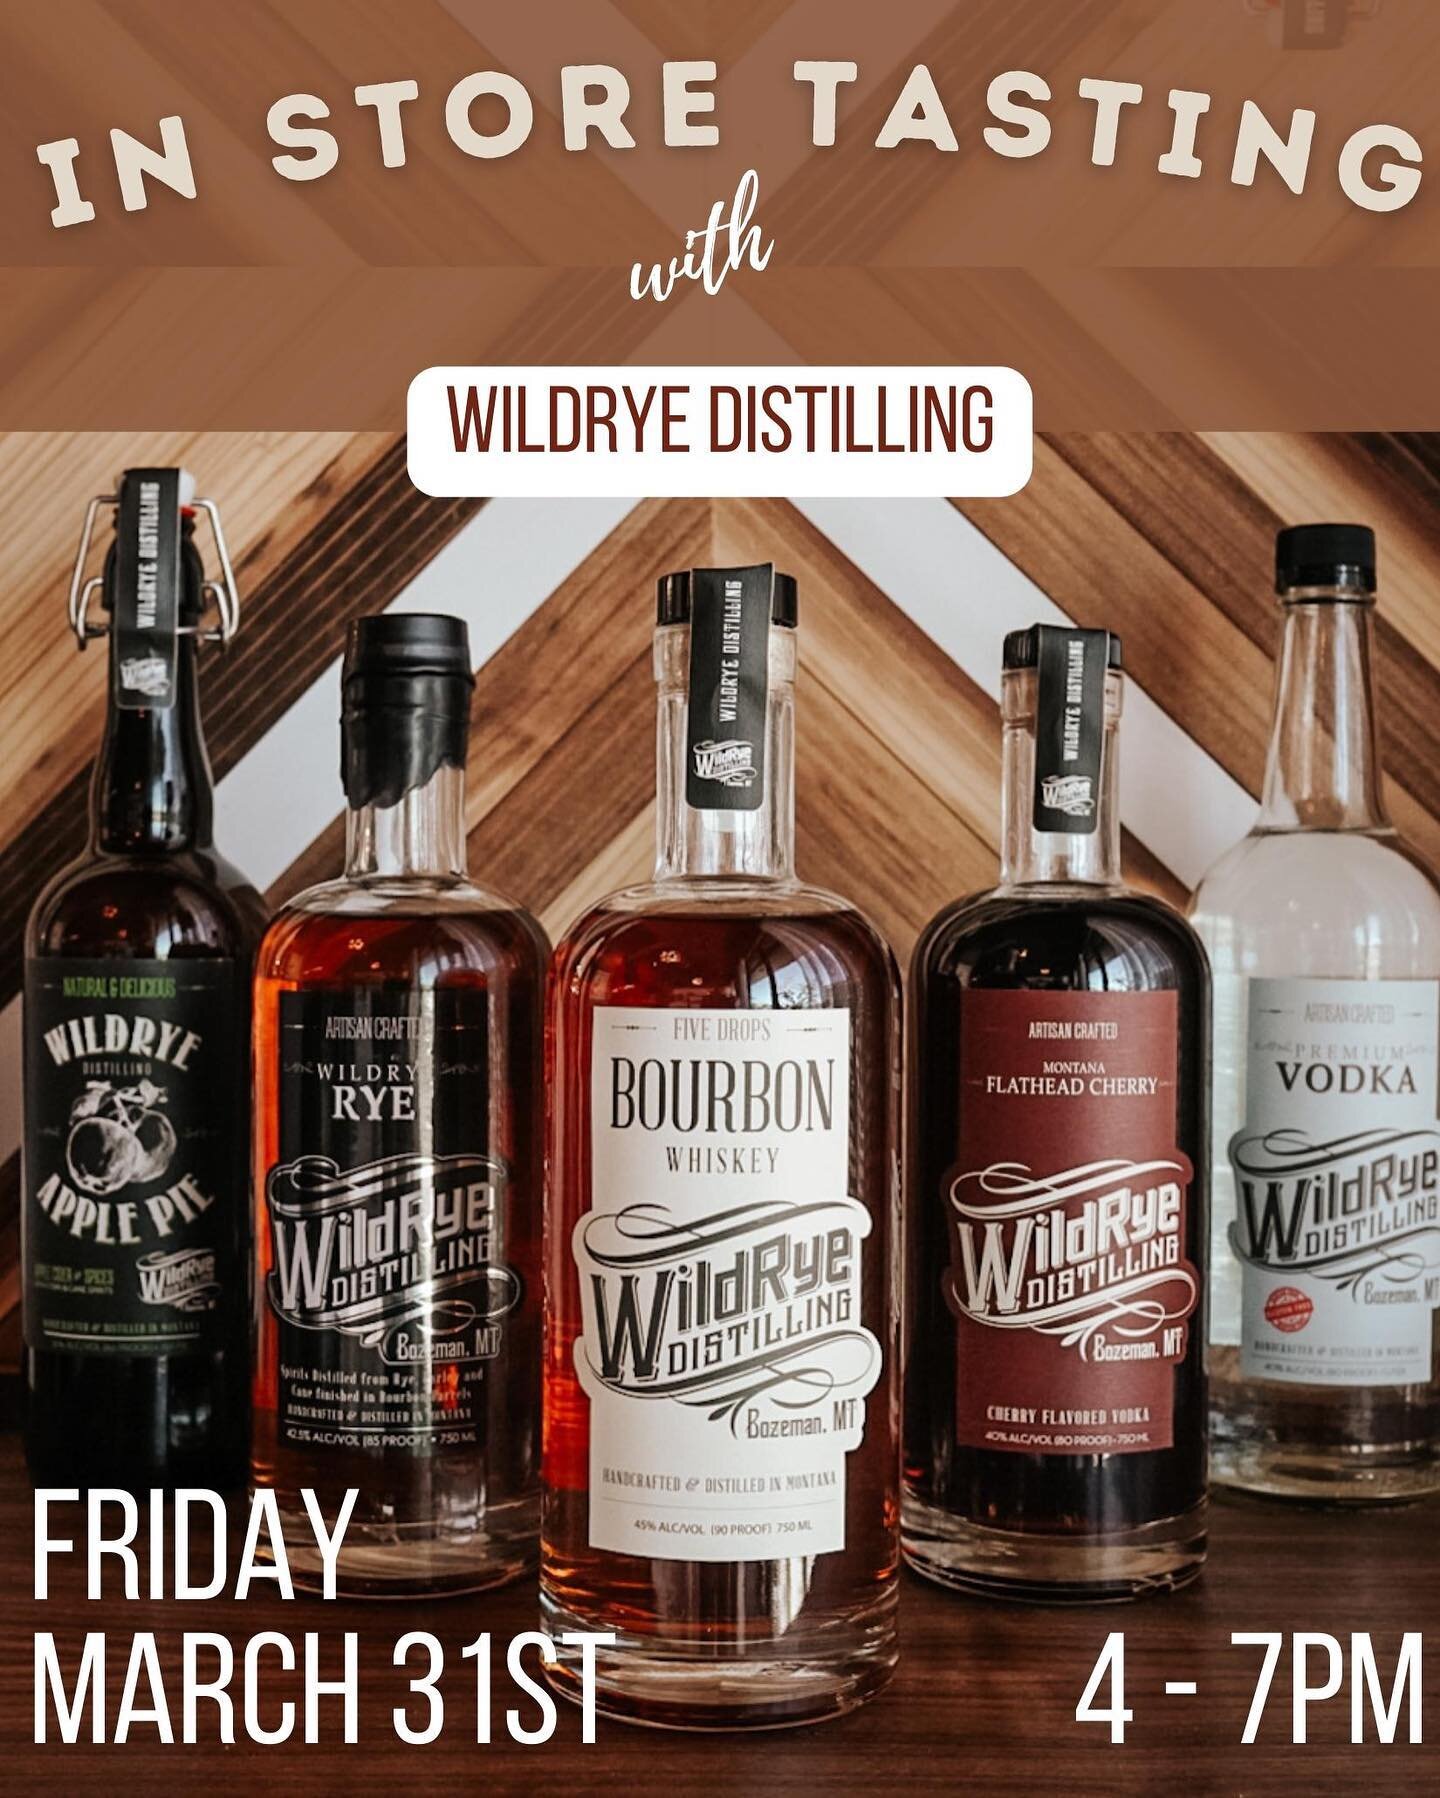 In store tasting 4-7pm tomorrow March 31st with @wildryewhiskey! Swing by to try a free taste of local Bozeman, Montana spirits! Grab a drink in the bar and stock up in the liquor store.